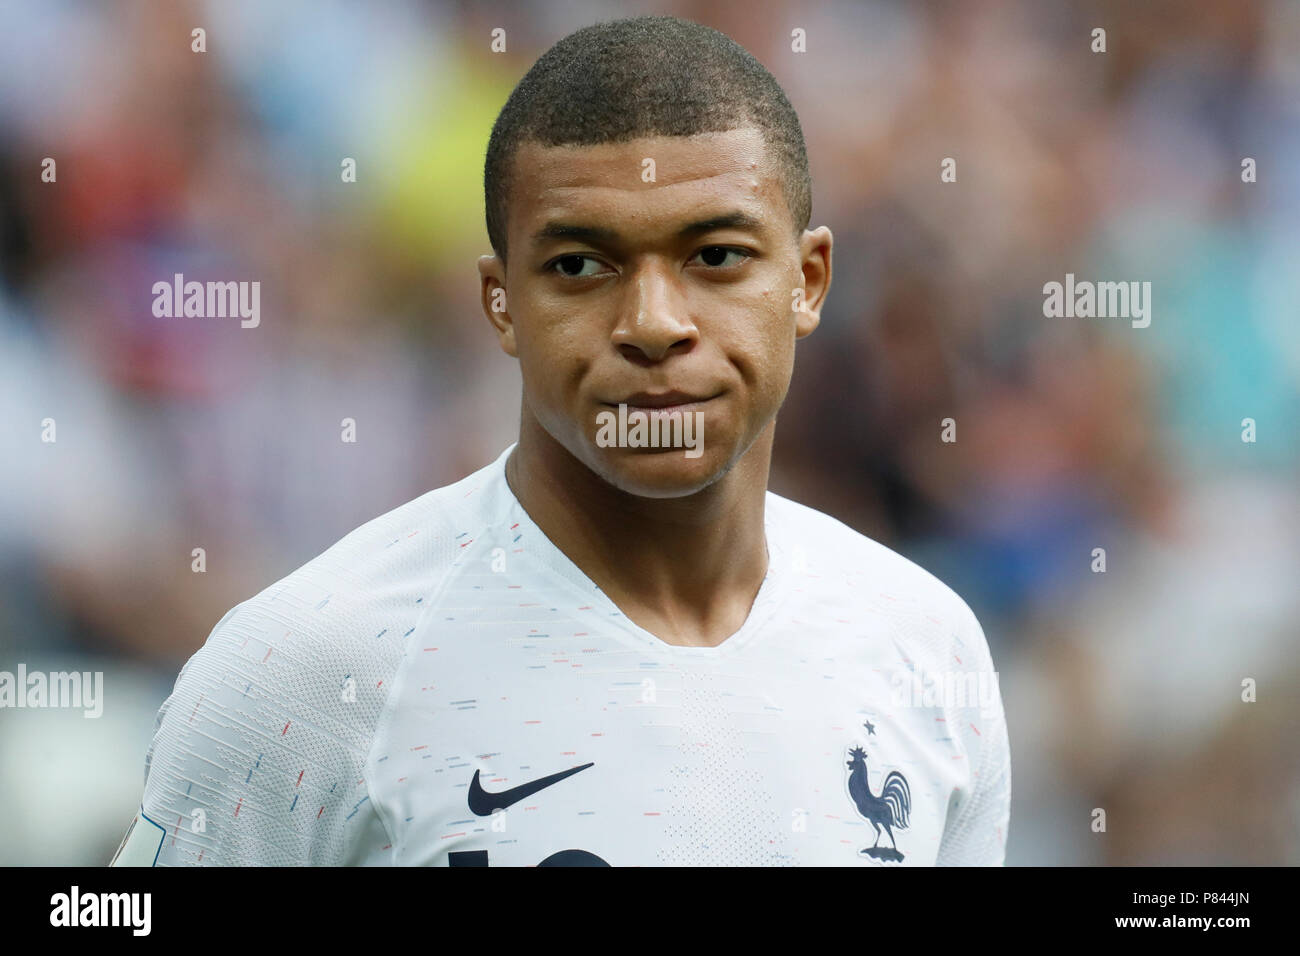 NIZHNY NOVGOROD, RUSSIA - JULY 6: Kylian Mbappe of France national team during the 2018 FIFA World Cup Russia Quarter Final match between Uruguay and France at Nizhny Novgorod Stadium on July 6, 2018 in Nizhny Novgorod, Russia. (MB Media) Stock Photo